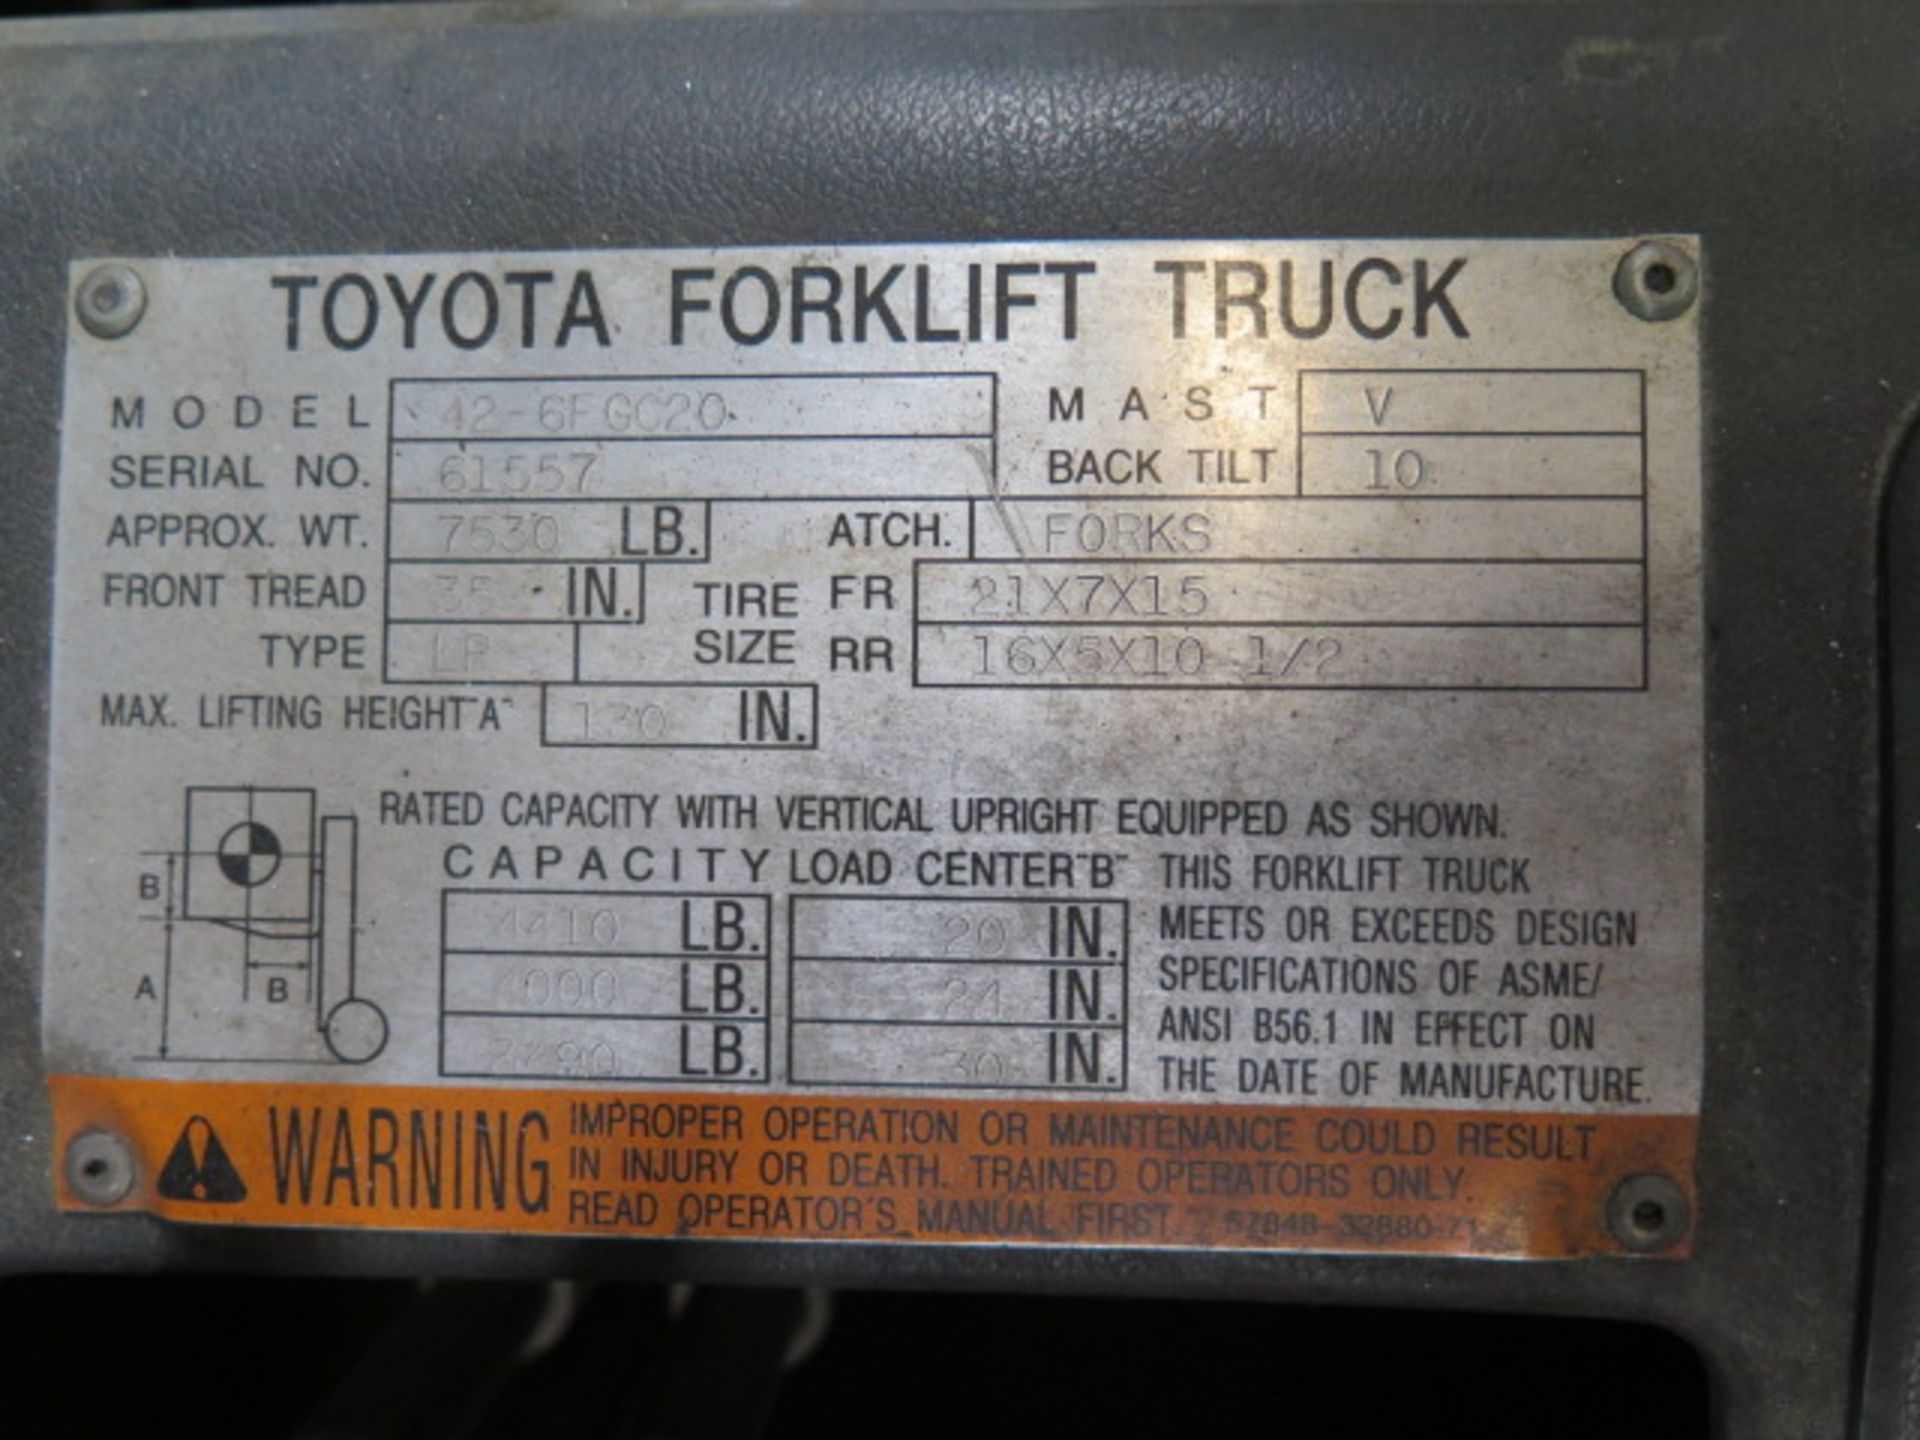 Toyota 42-6FGC20 4400 Lb Cap LPG Forklift s/n 61557 w/ 2-Stage Mast, 130” Lift Height, SOLD AS IS - Image 13 of 13